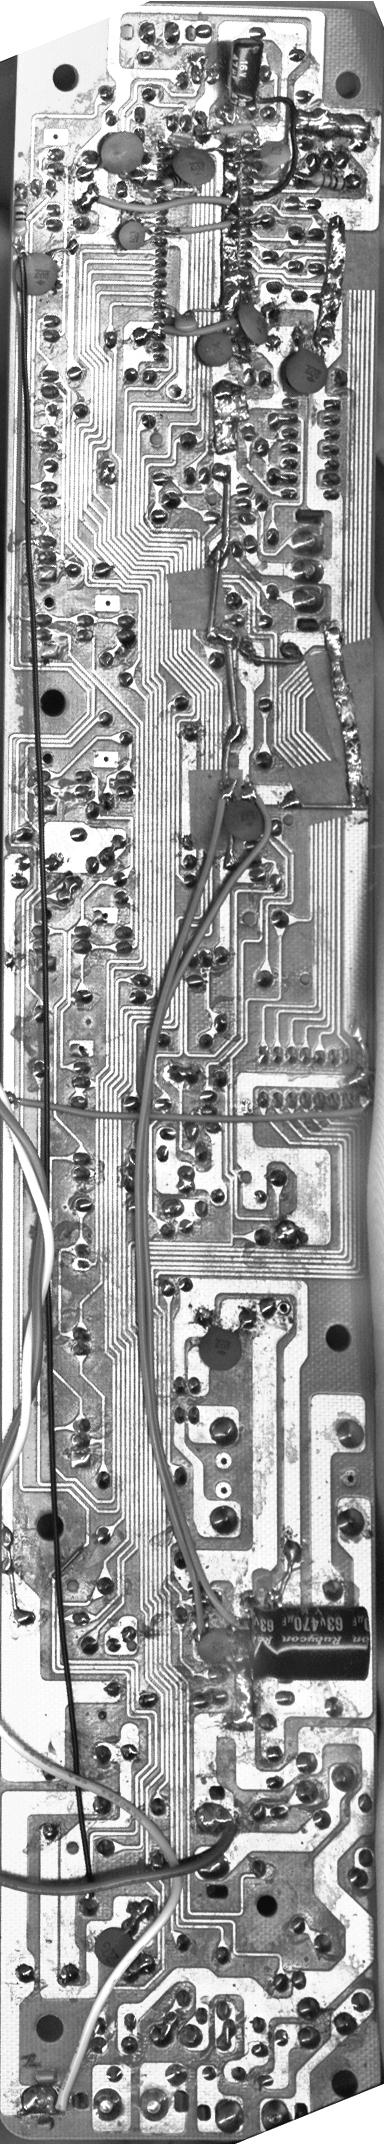 PART 3: PRINTED CIRCUIT BOARD LAYOUT TECHNIQUES PCB Example 1 Figure 28 shows some improvements on a typical printed circuit board used in a washing machine.